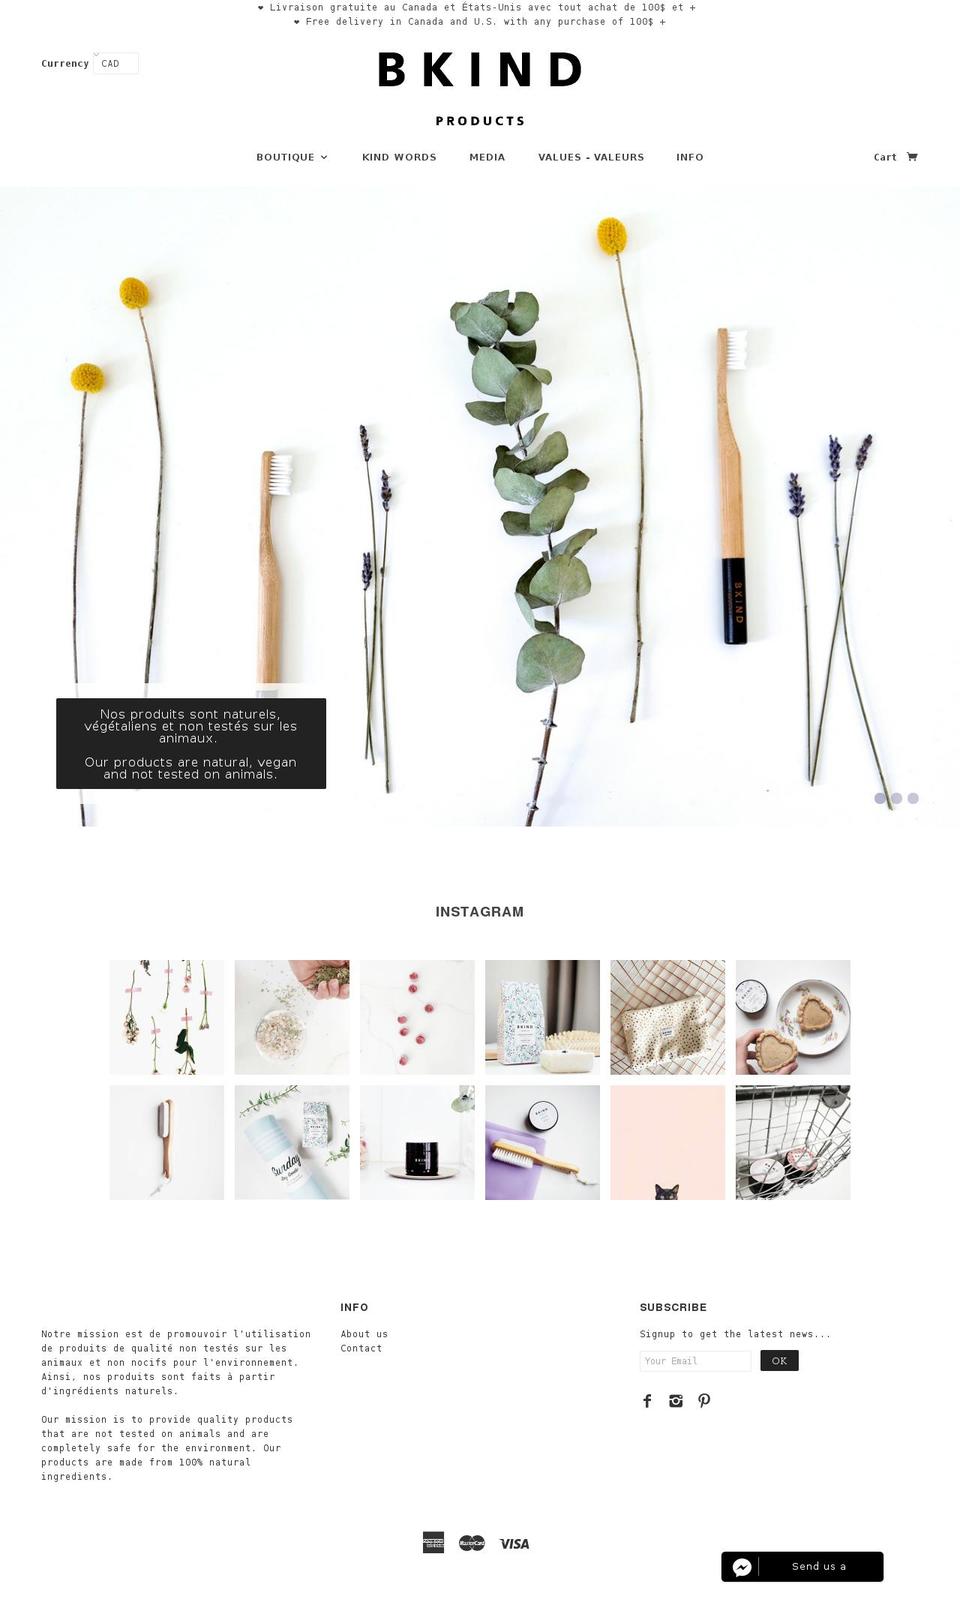 Be Yours Shopify theme site example bkind.ca